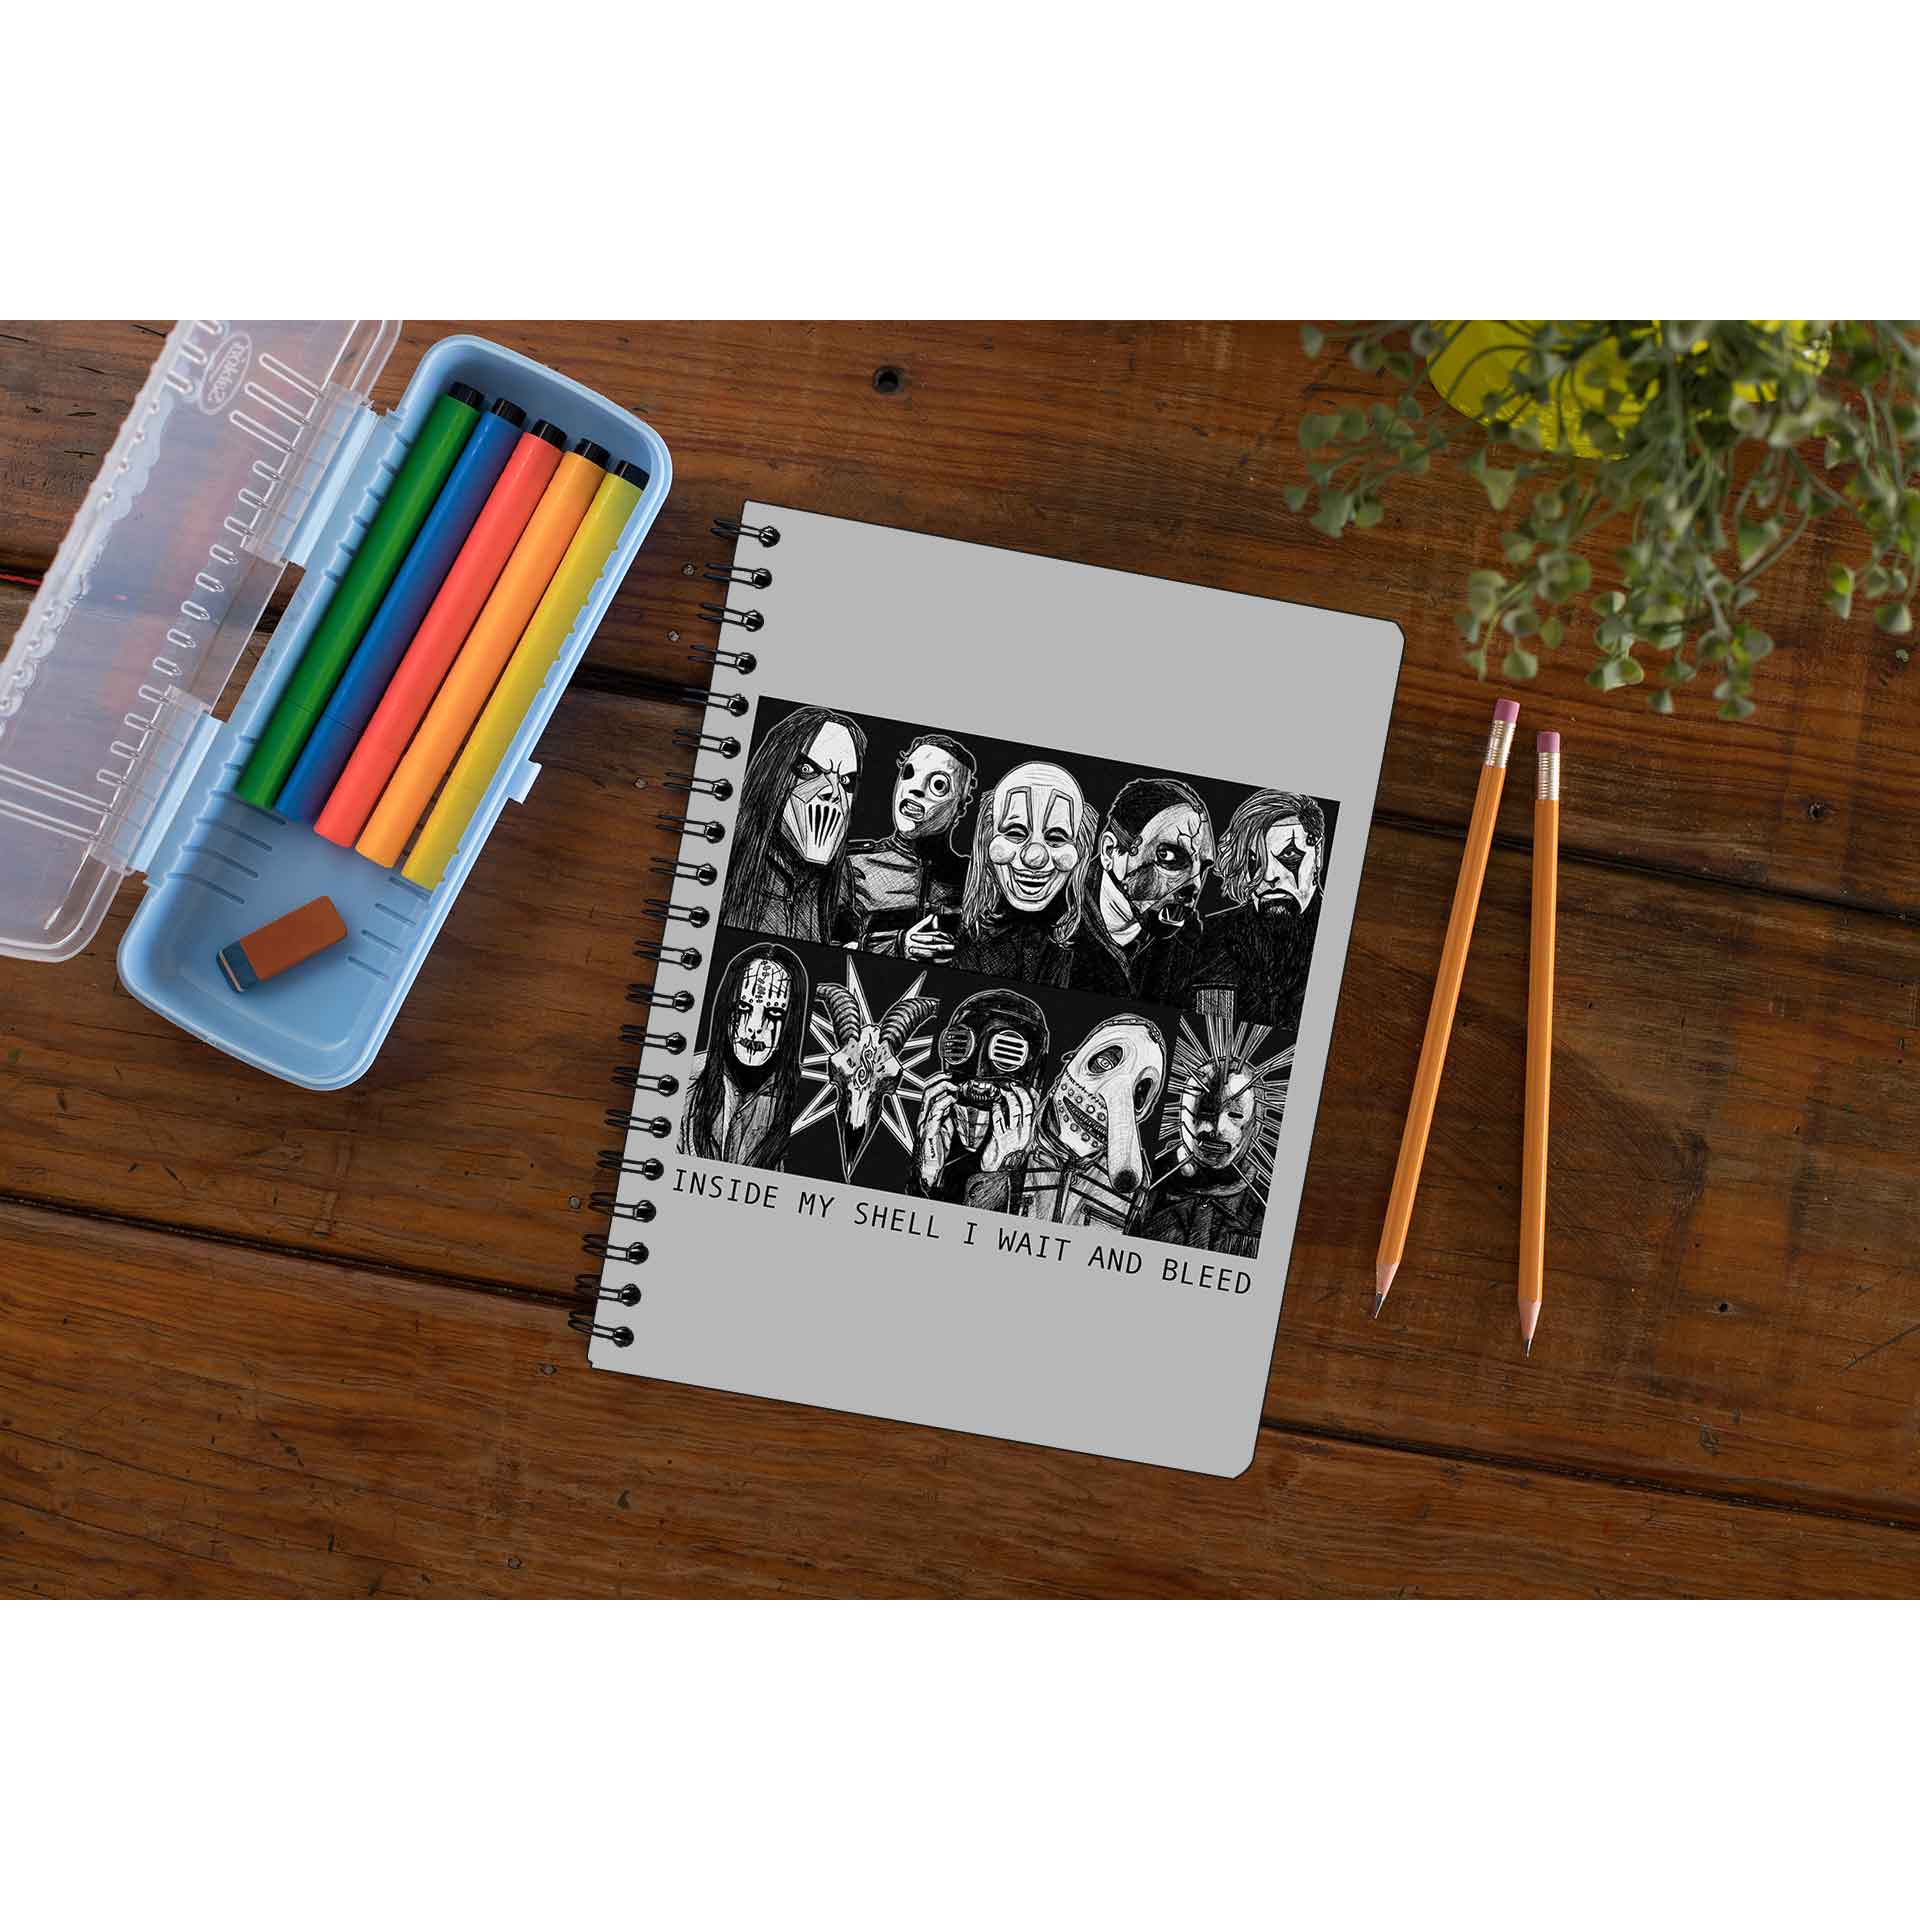 slipknot wait & bleed notebook notepad diary buy online united states of america usa the banyan tee tbt unruled